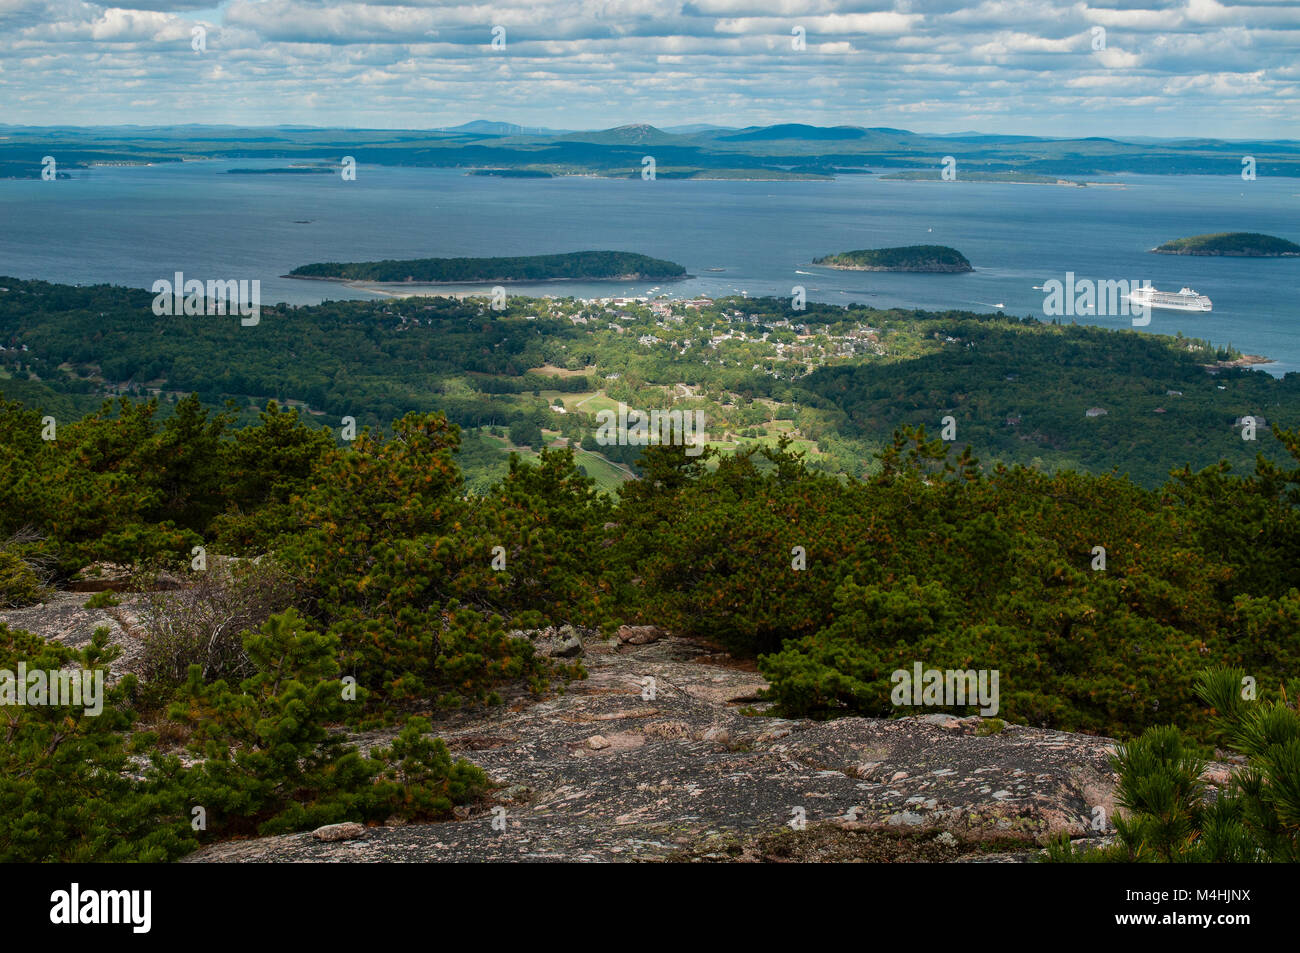 The Town Of Bar Harbor As Seen From Champlain Mt, Acadia National Park, Maine Stock Photo